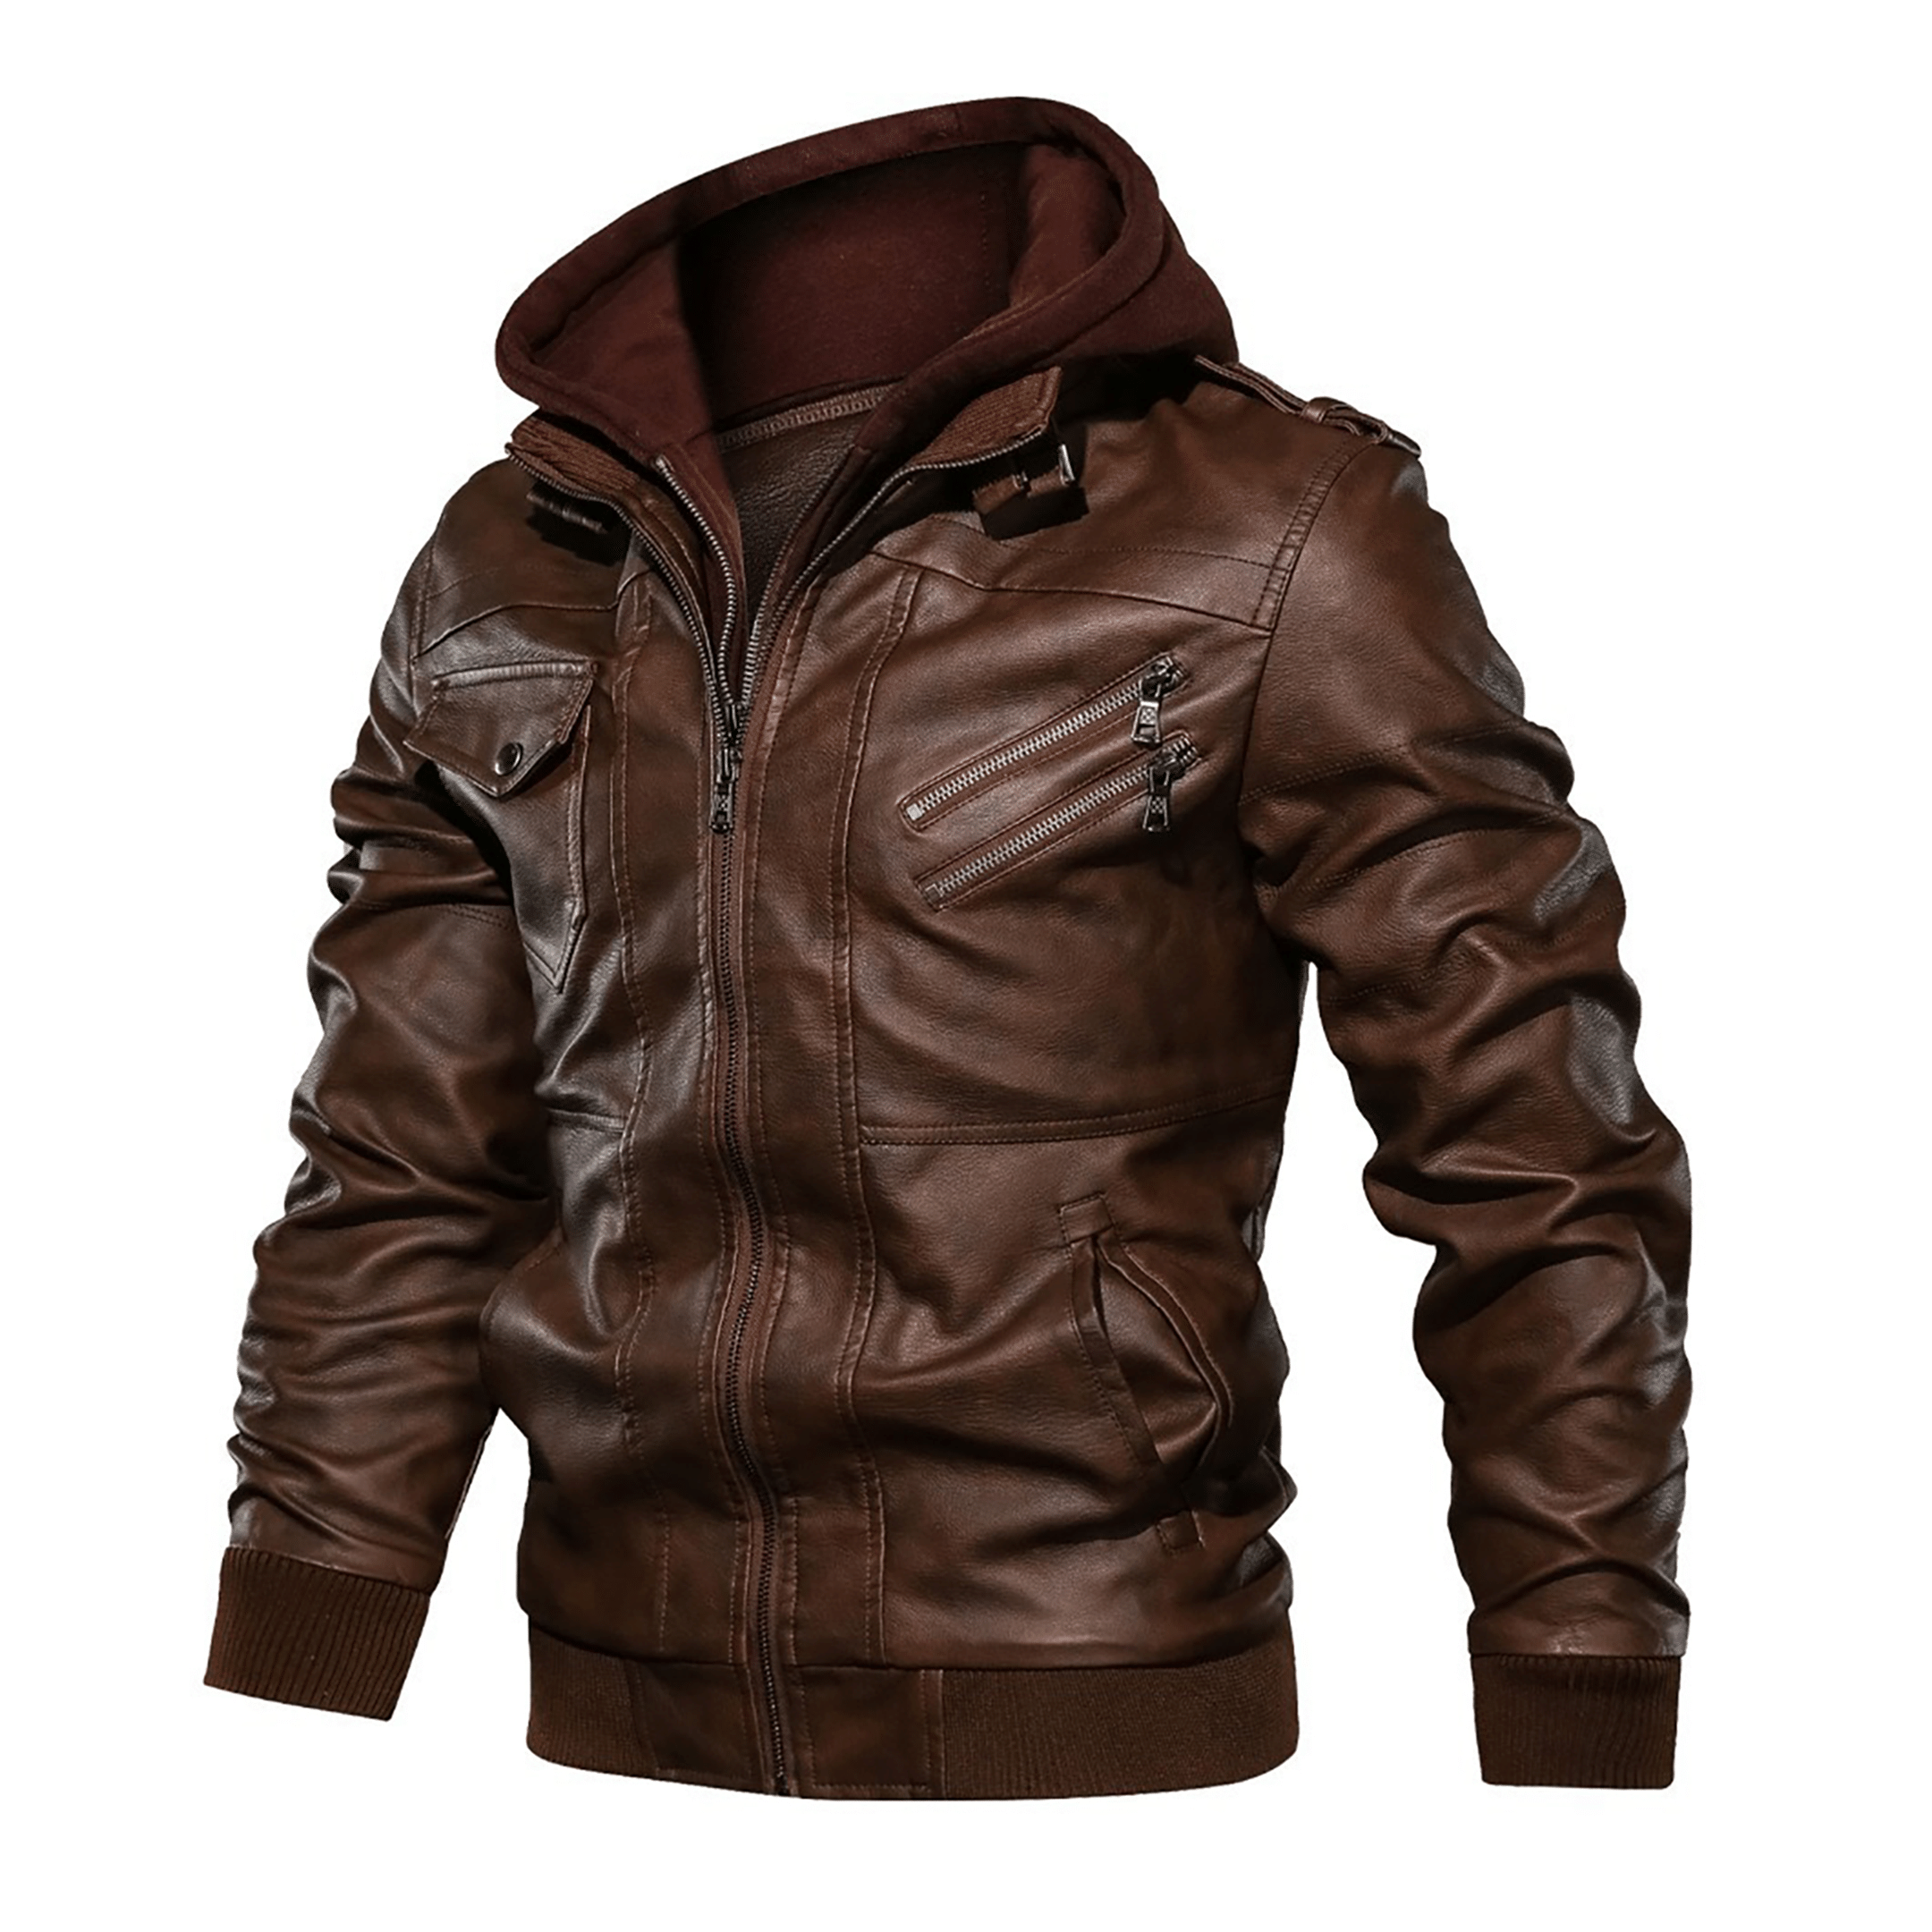 Top leather jackets and latest products 265